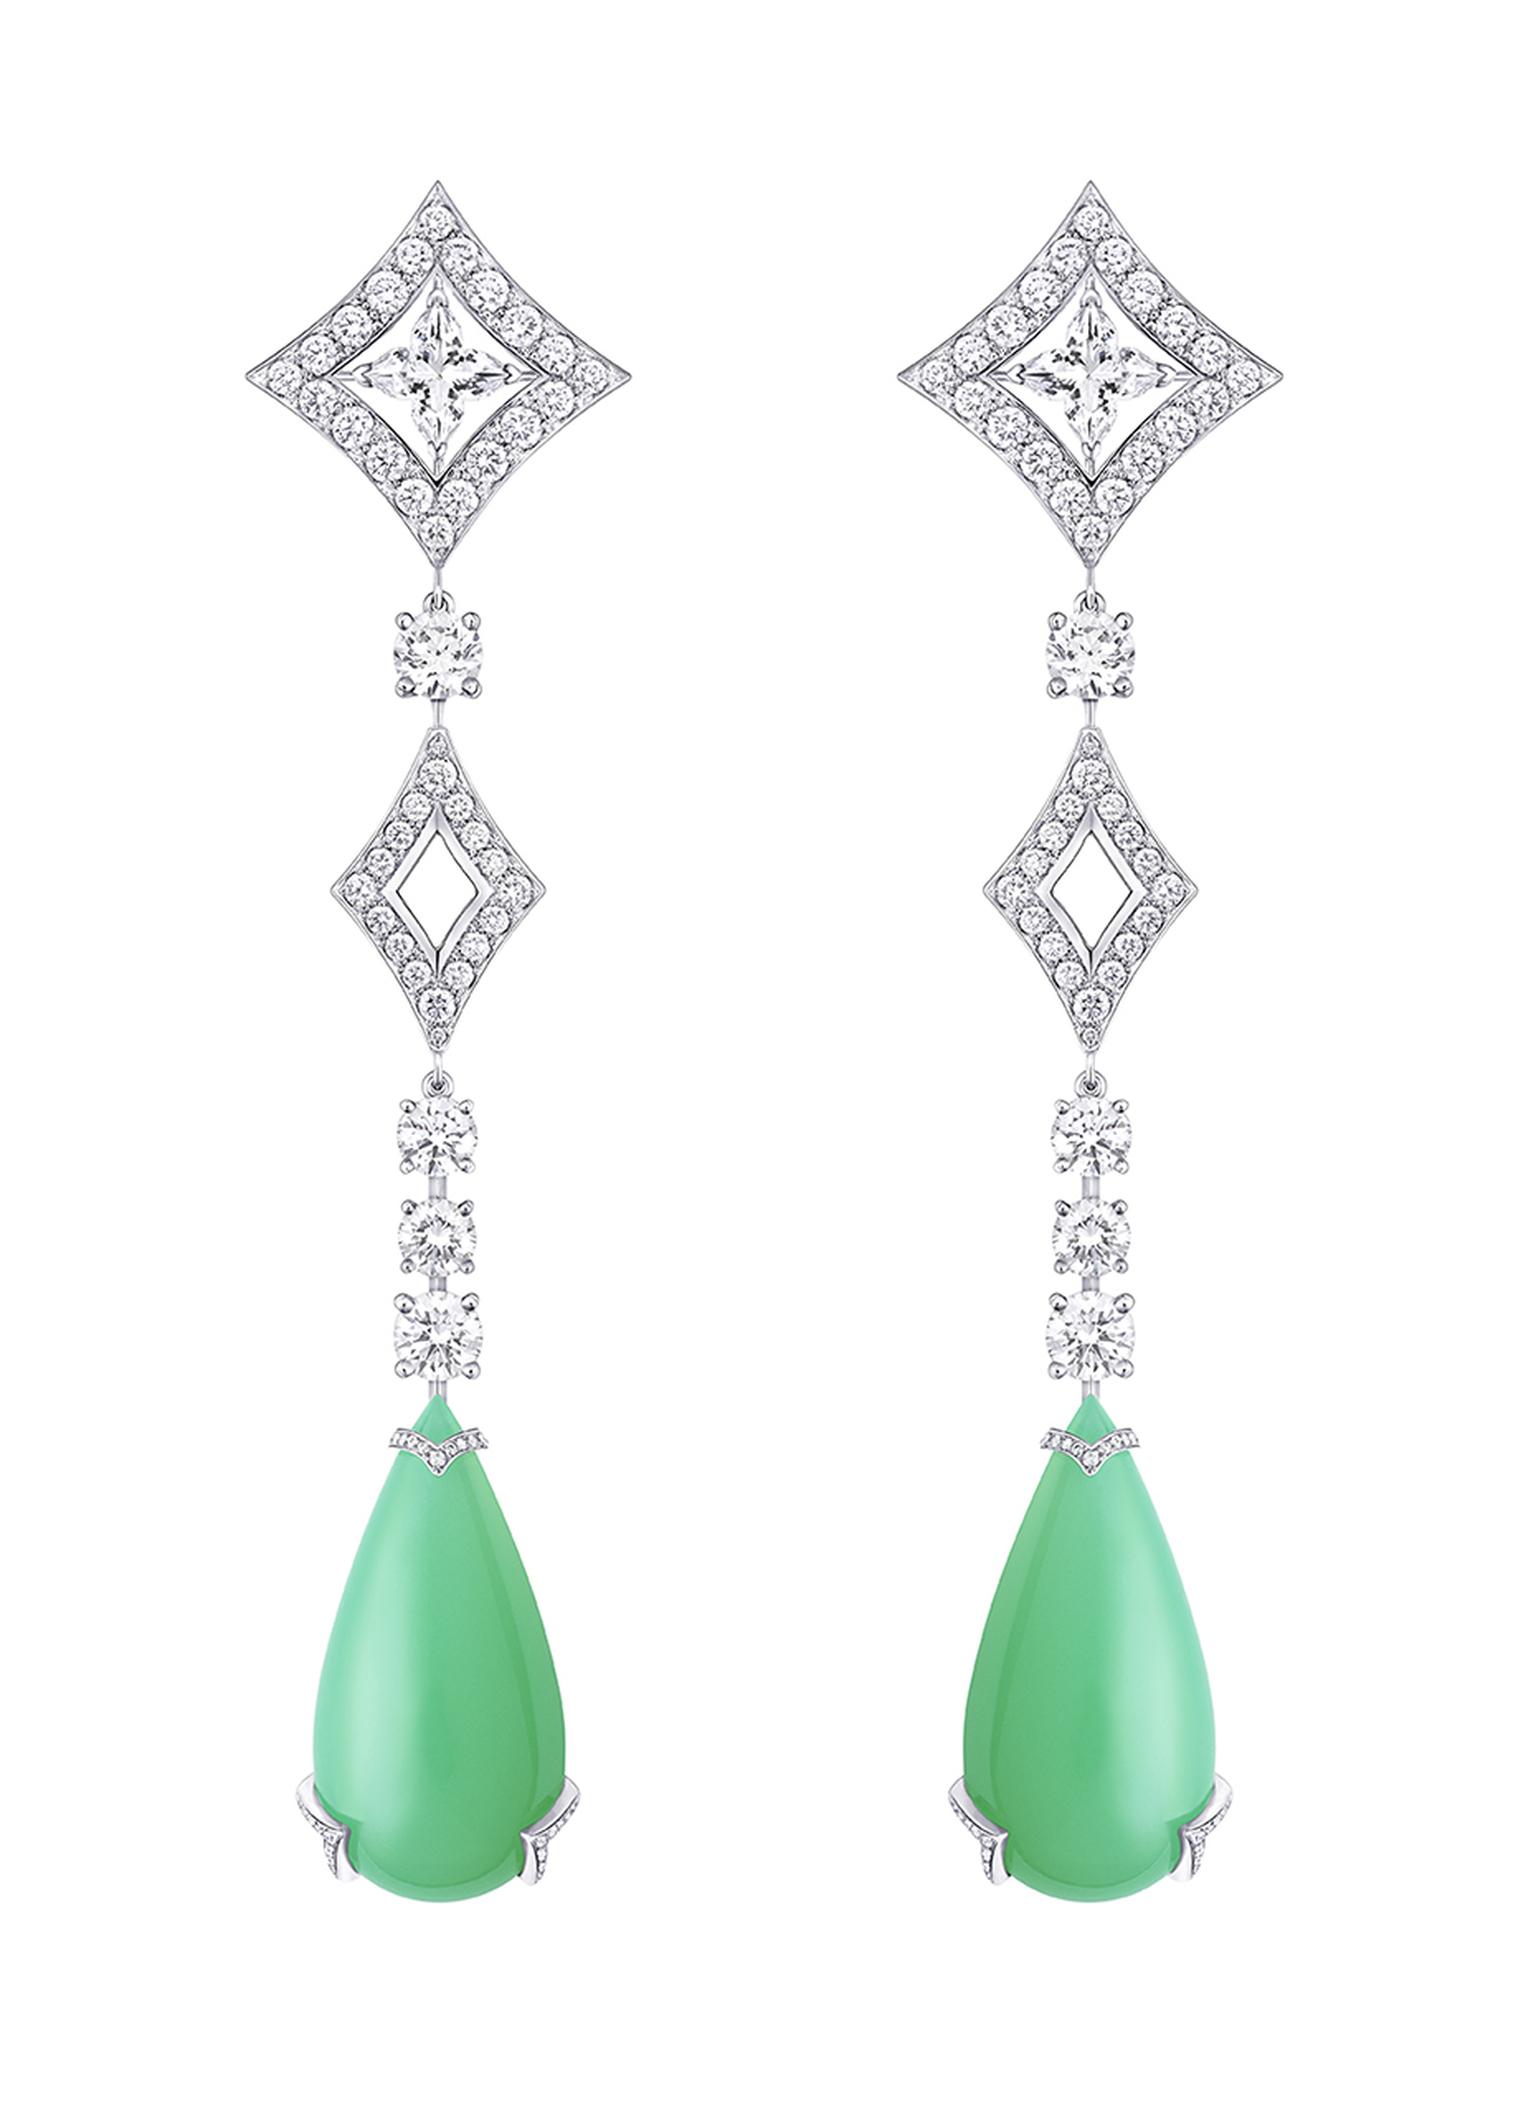 Louis Vuitton Acte V Metamorphosis high jewellery earrings featuring chrysoprase drops and diamonds.